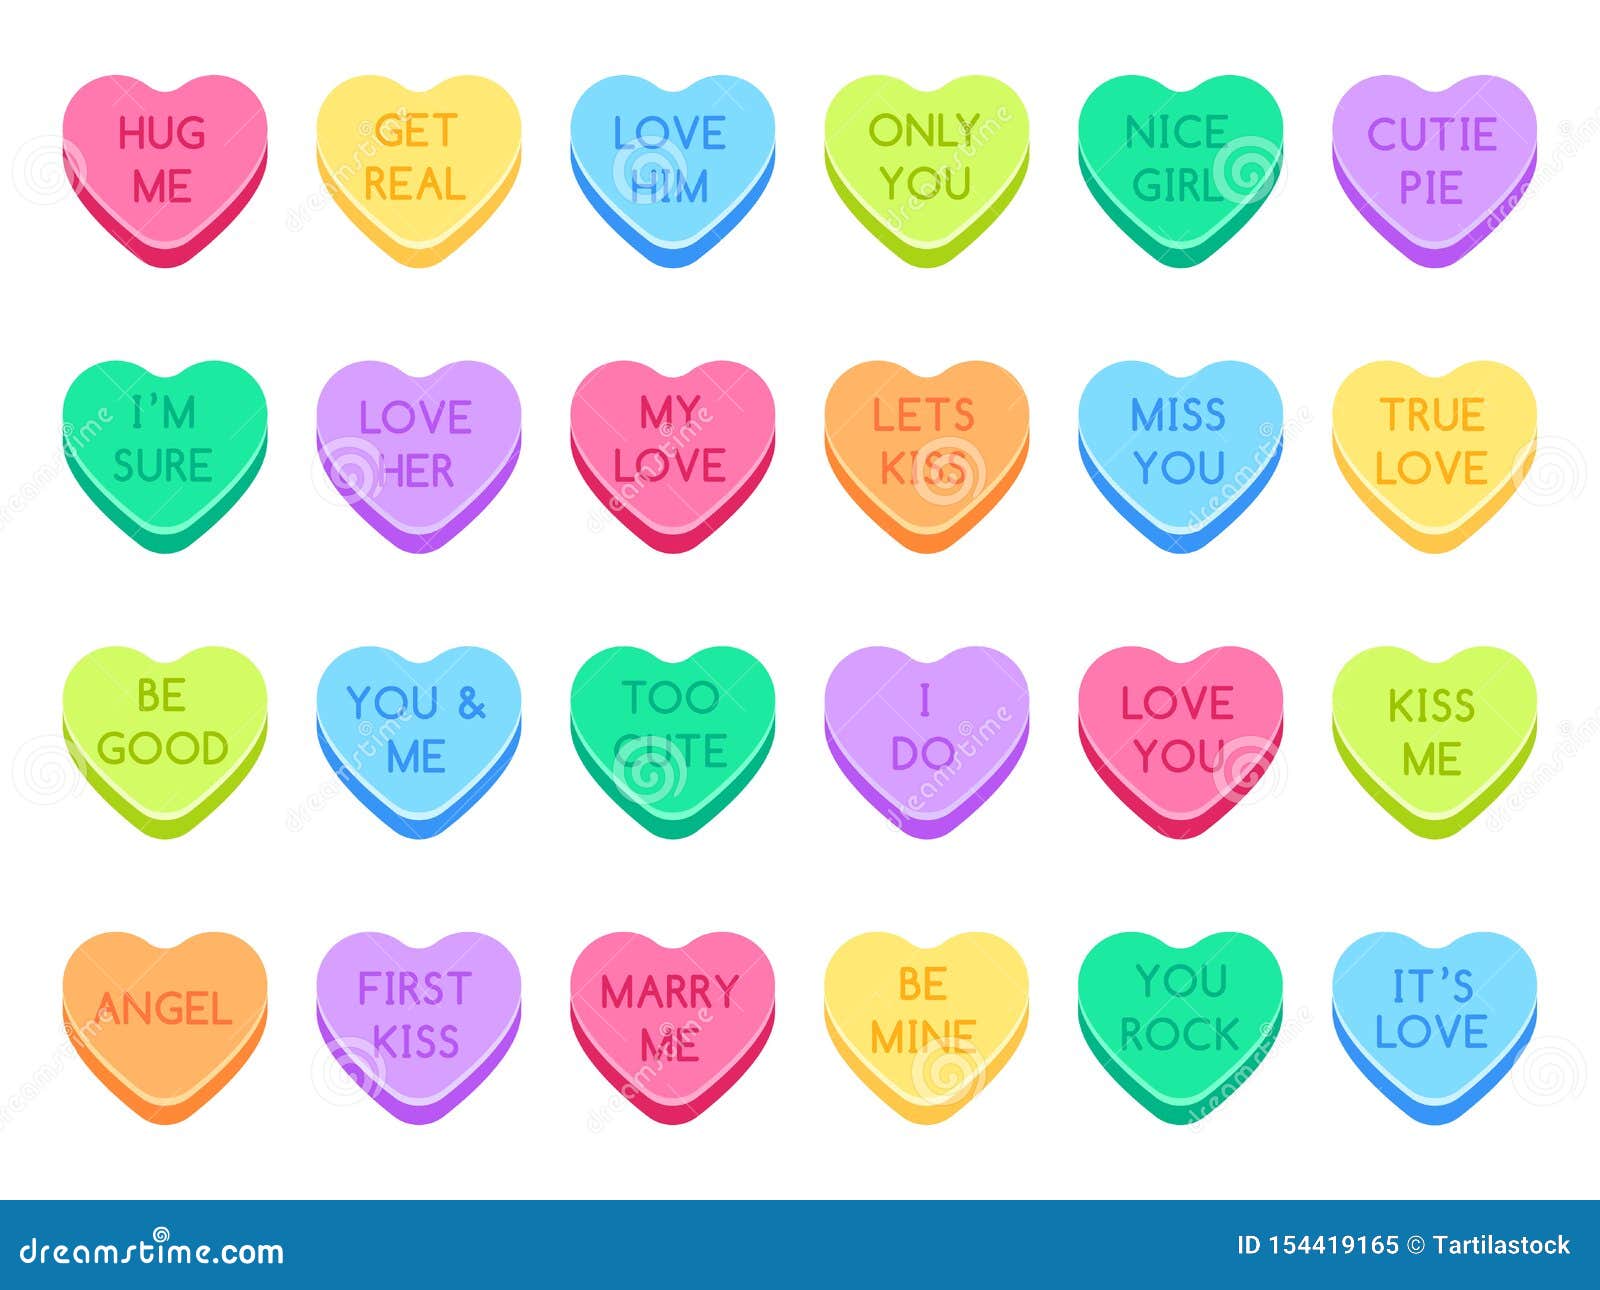 sweetheart candy. sweet heart candies, sweets valentines and conversation love hearts candies flat  